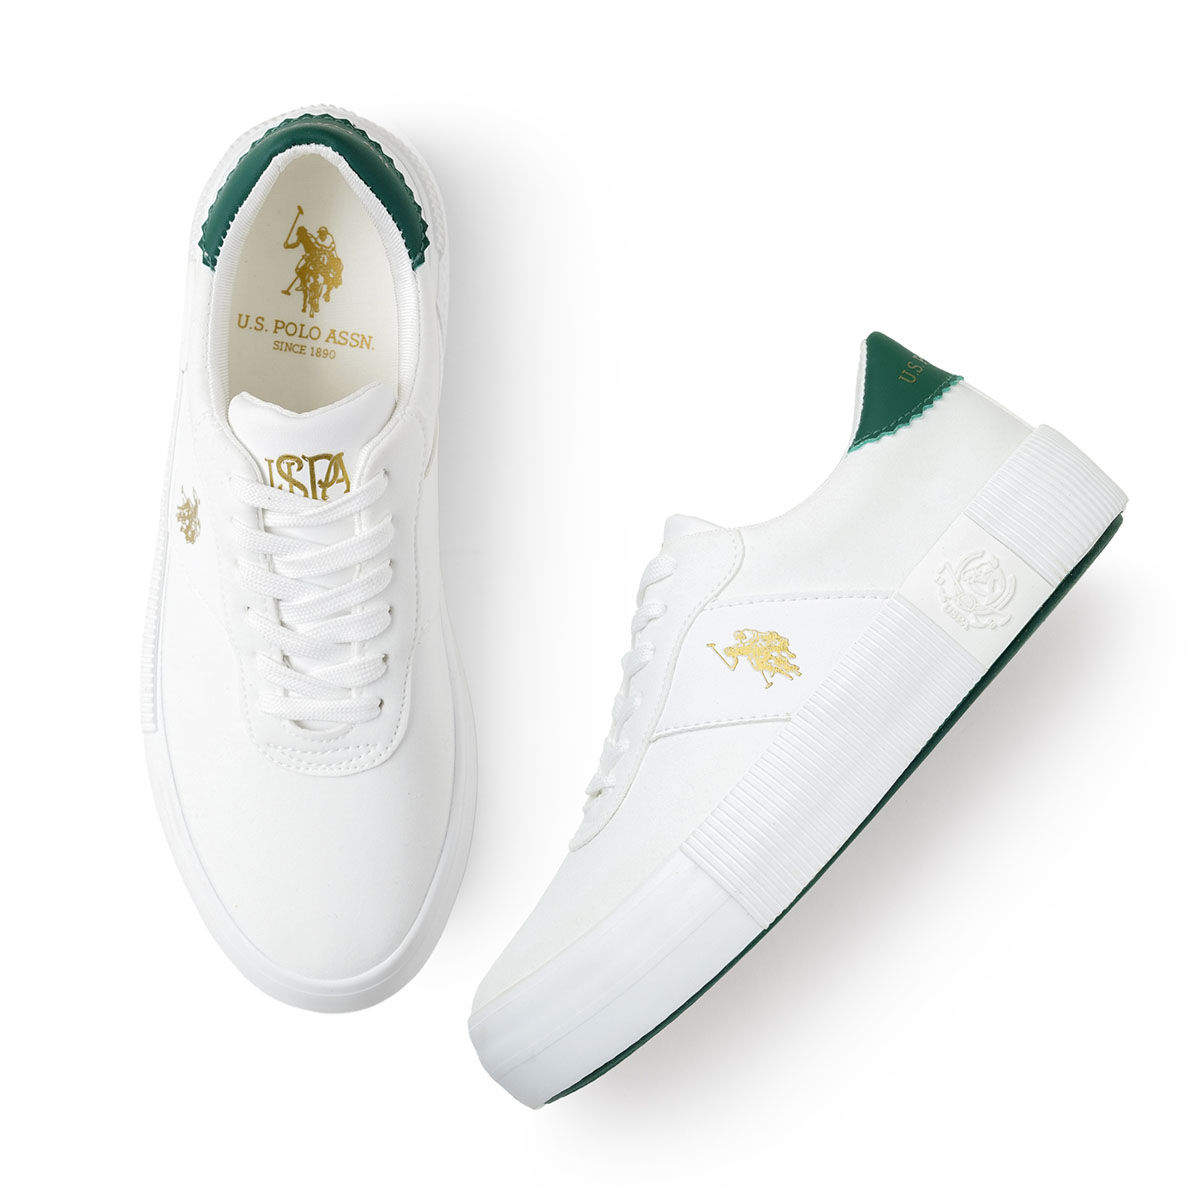 Buy White Sneakers for Women by Puma Online | Ajio.com